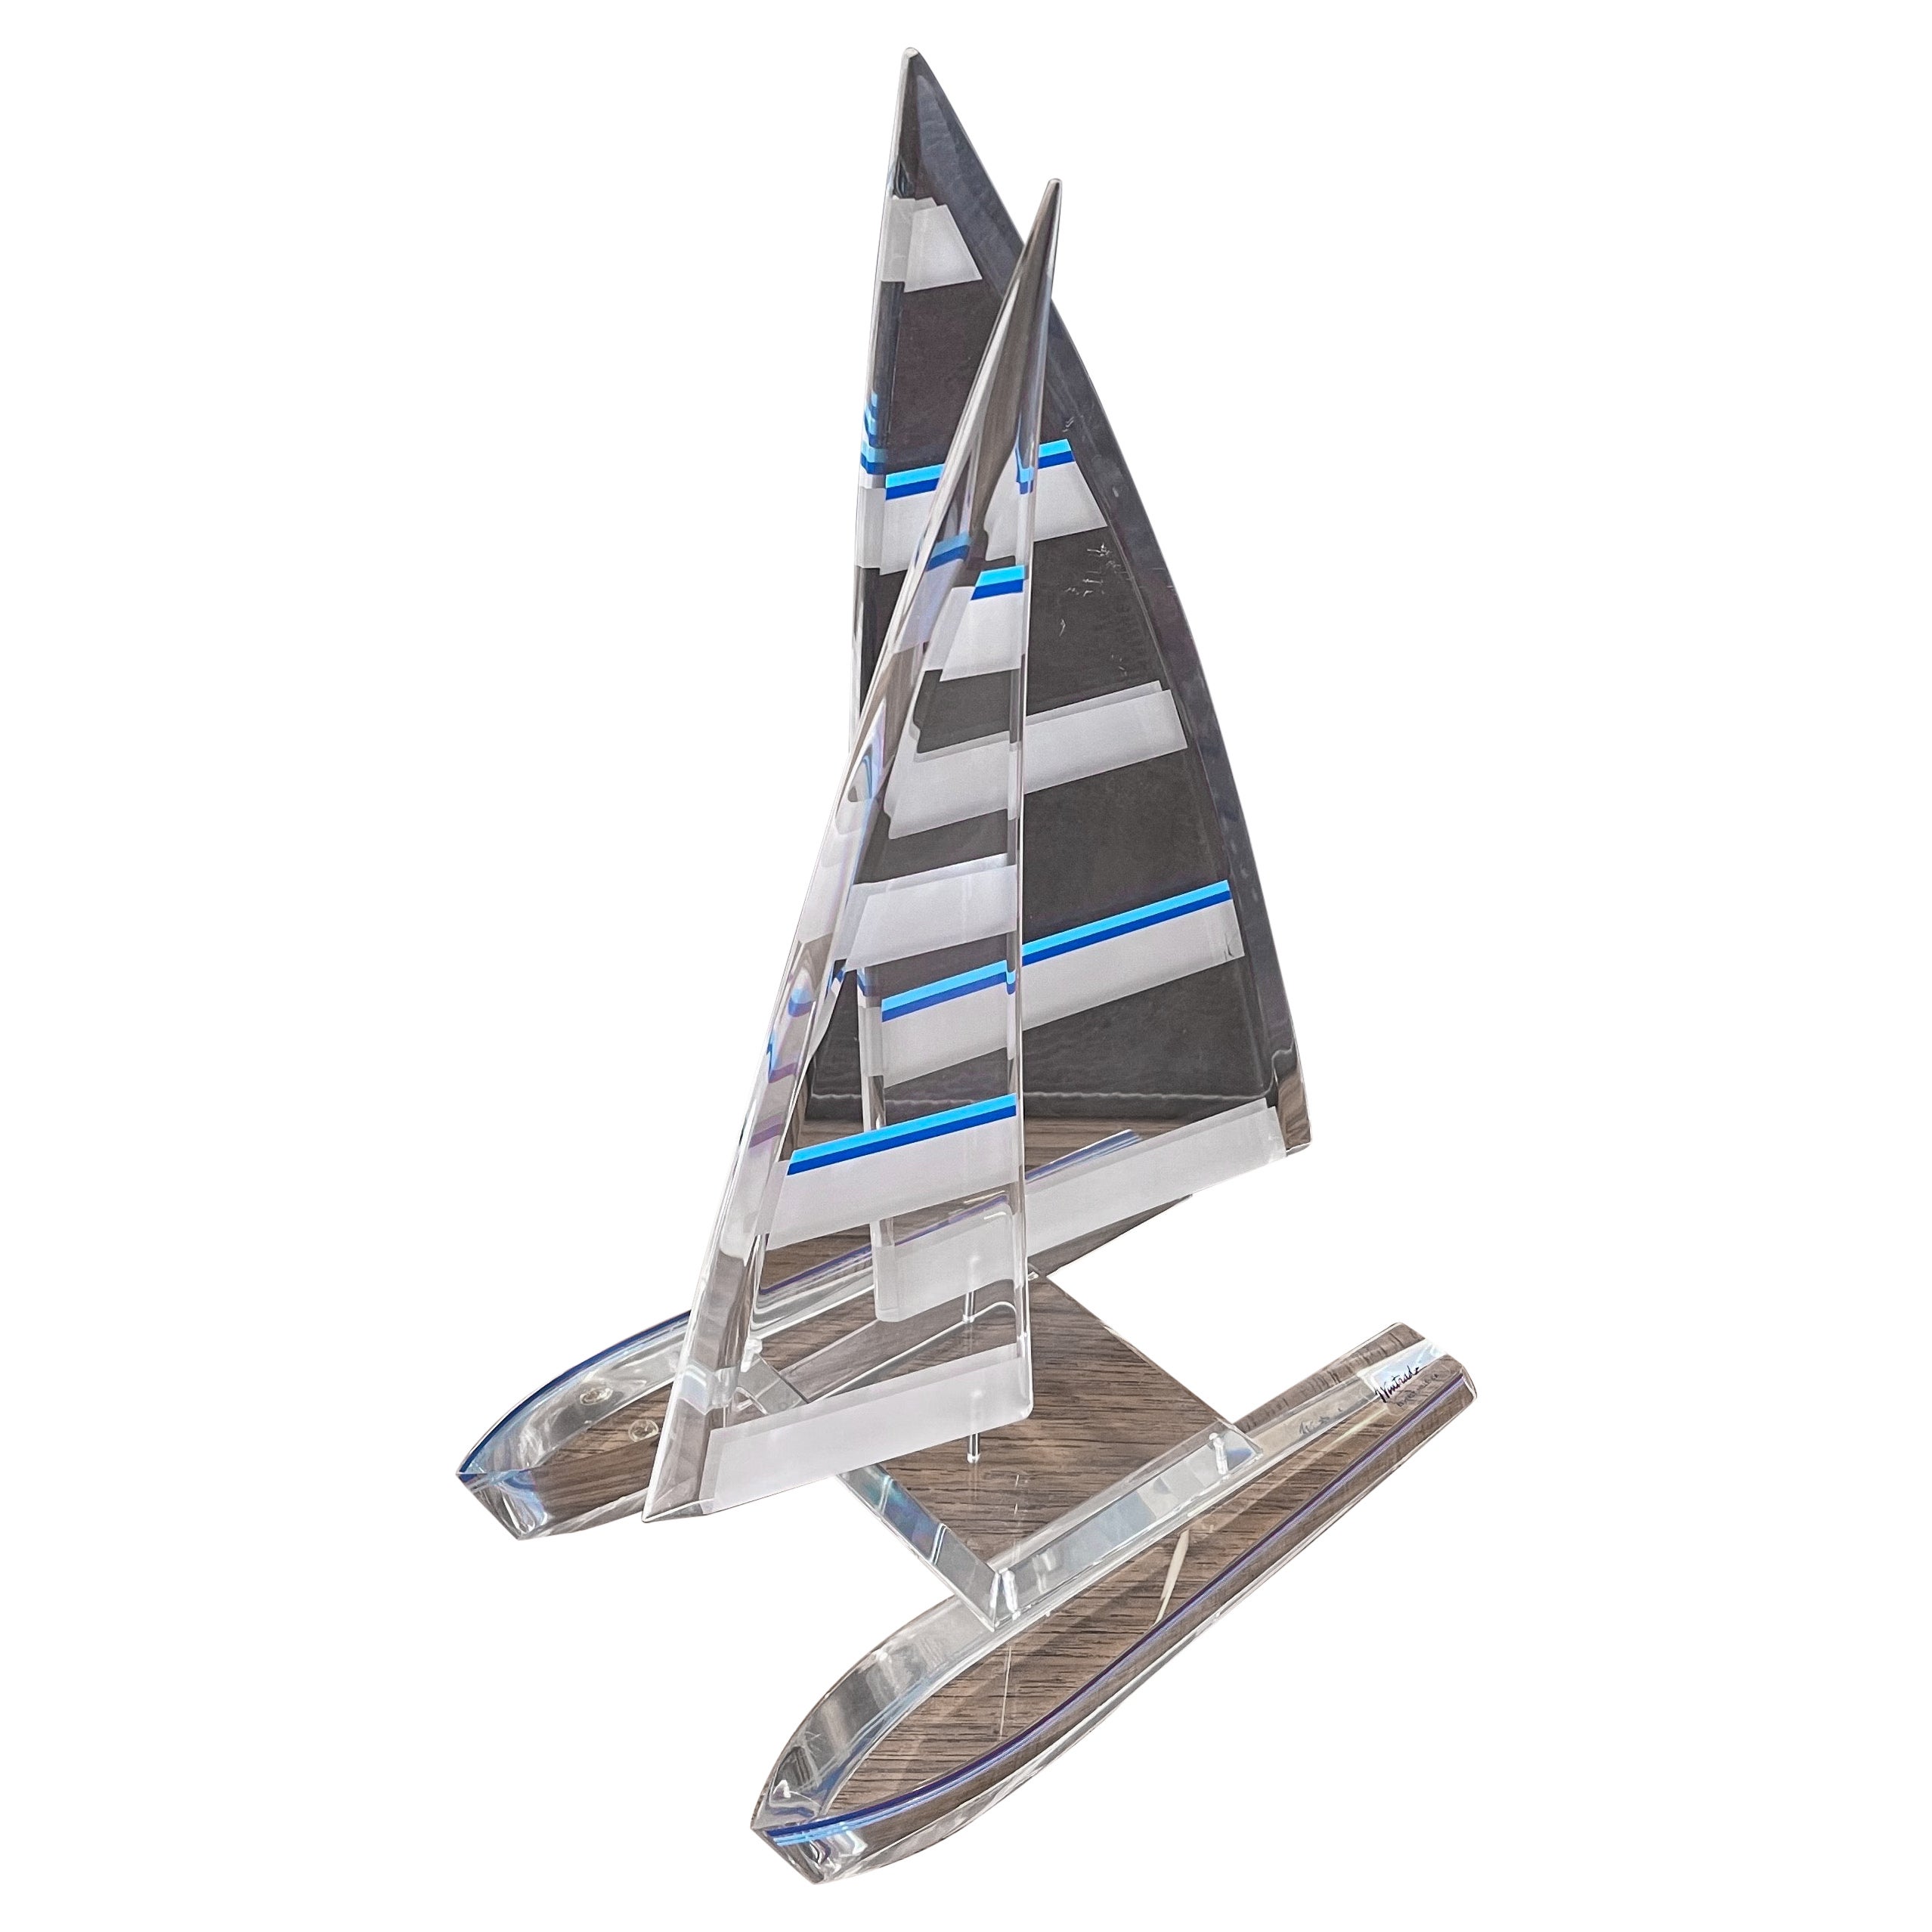 Lucite Sailboat / Catamaran Sculpture by Wintrade of Beverly Hills For Sale